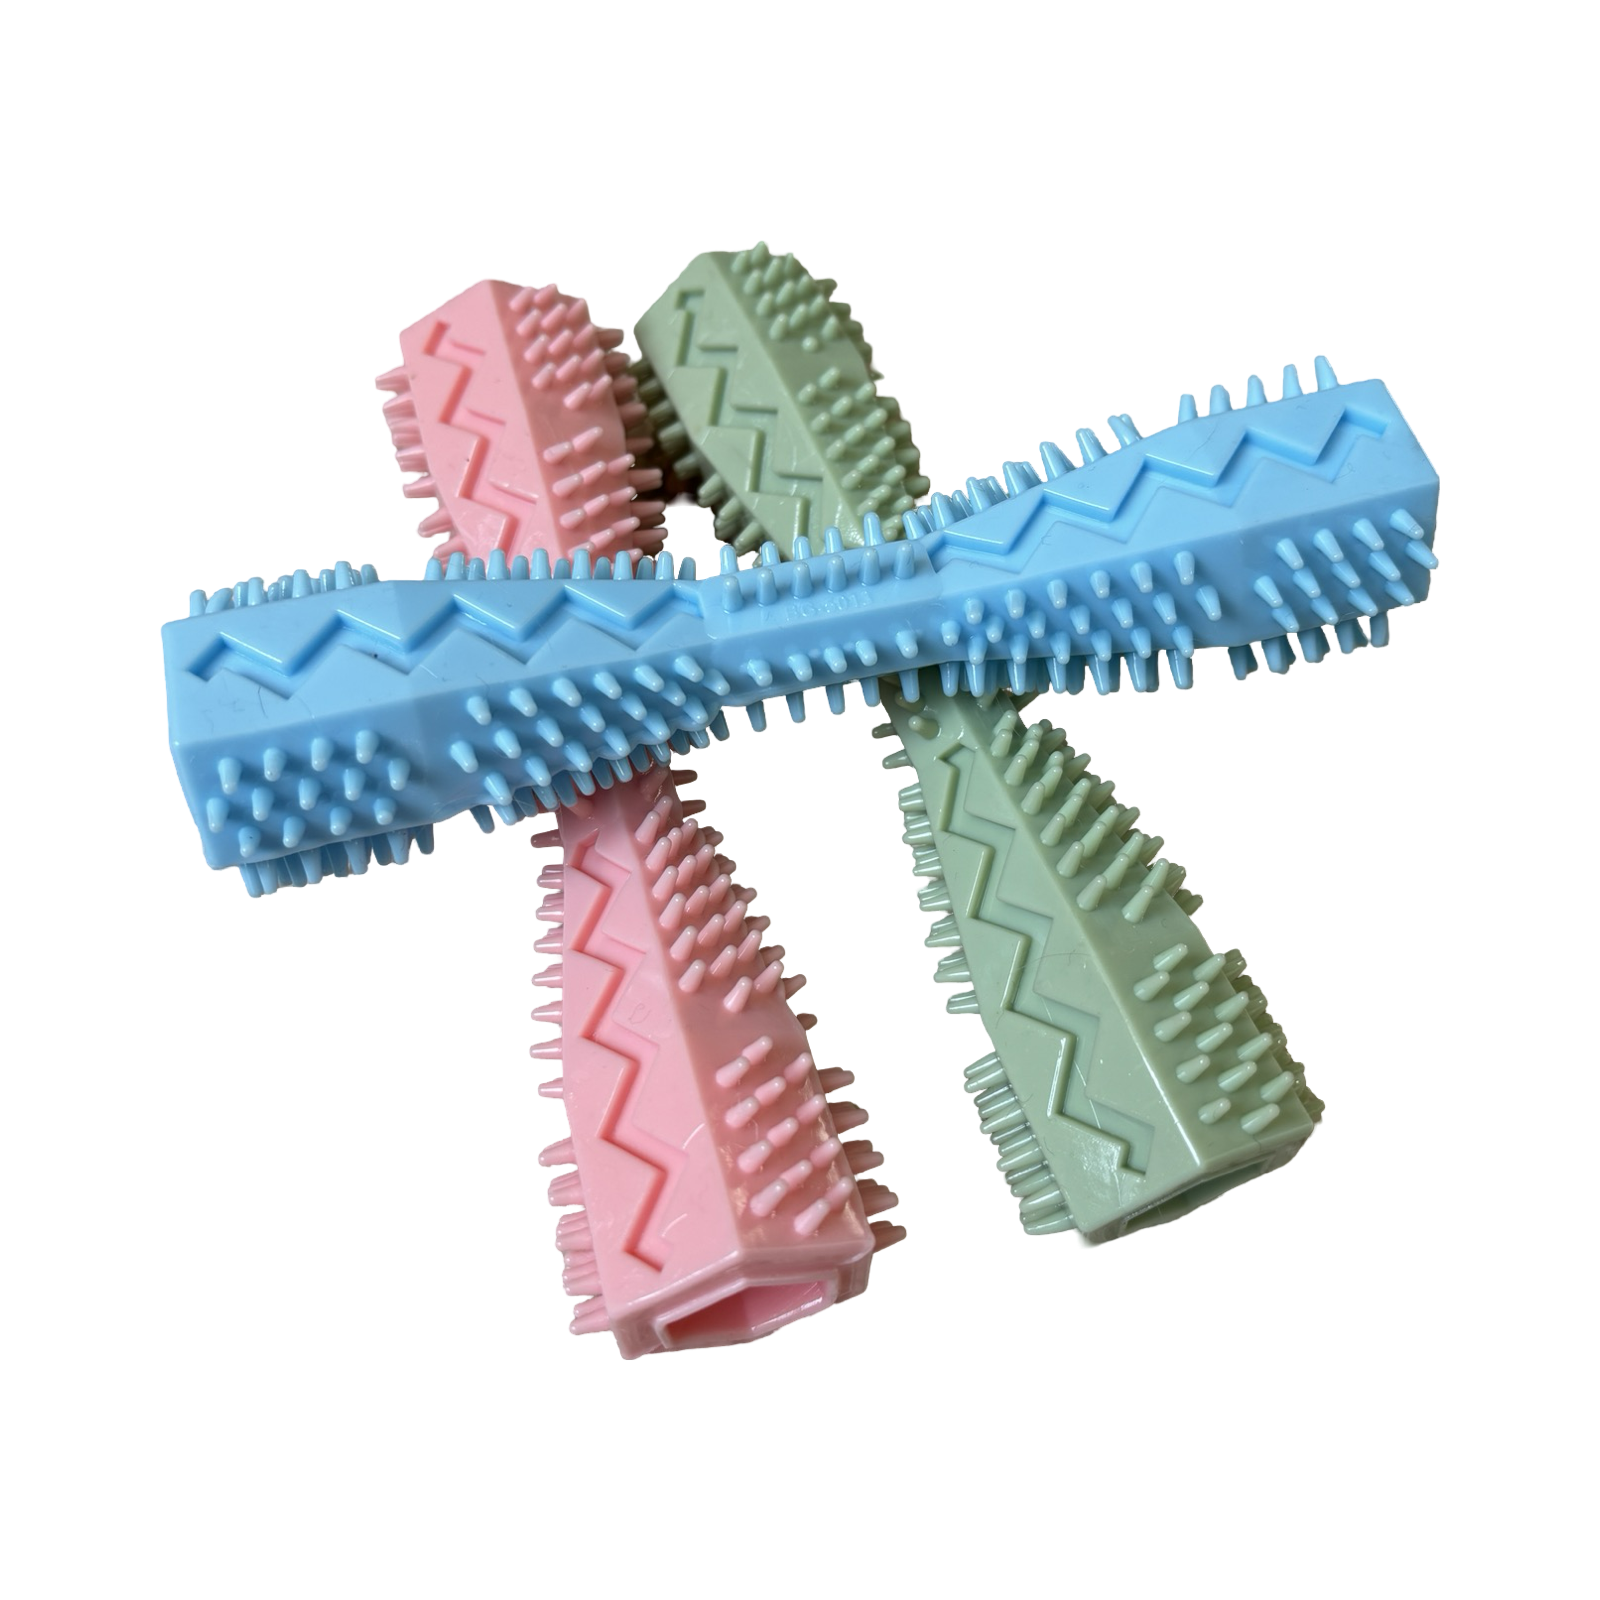 Toothbrush Chew Toys